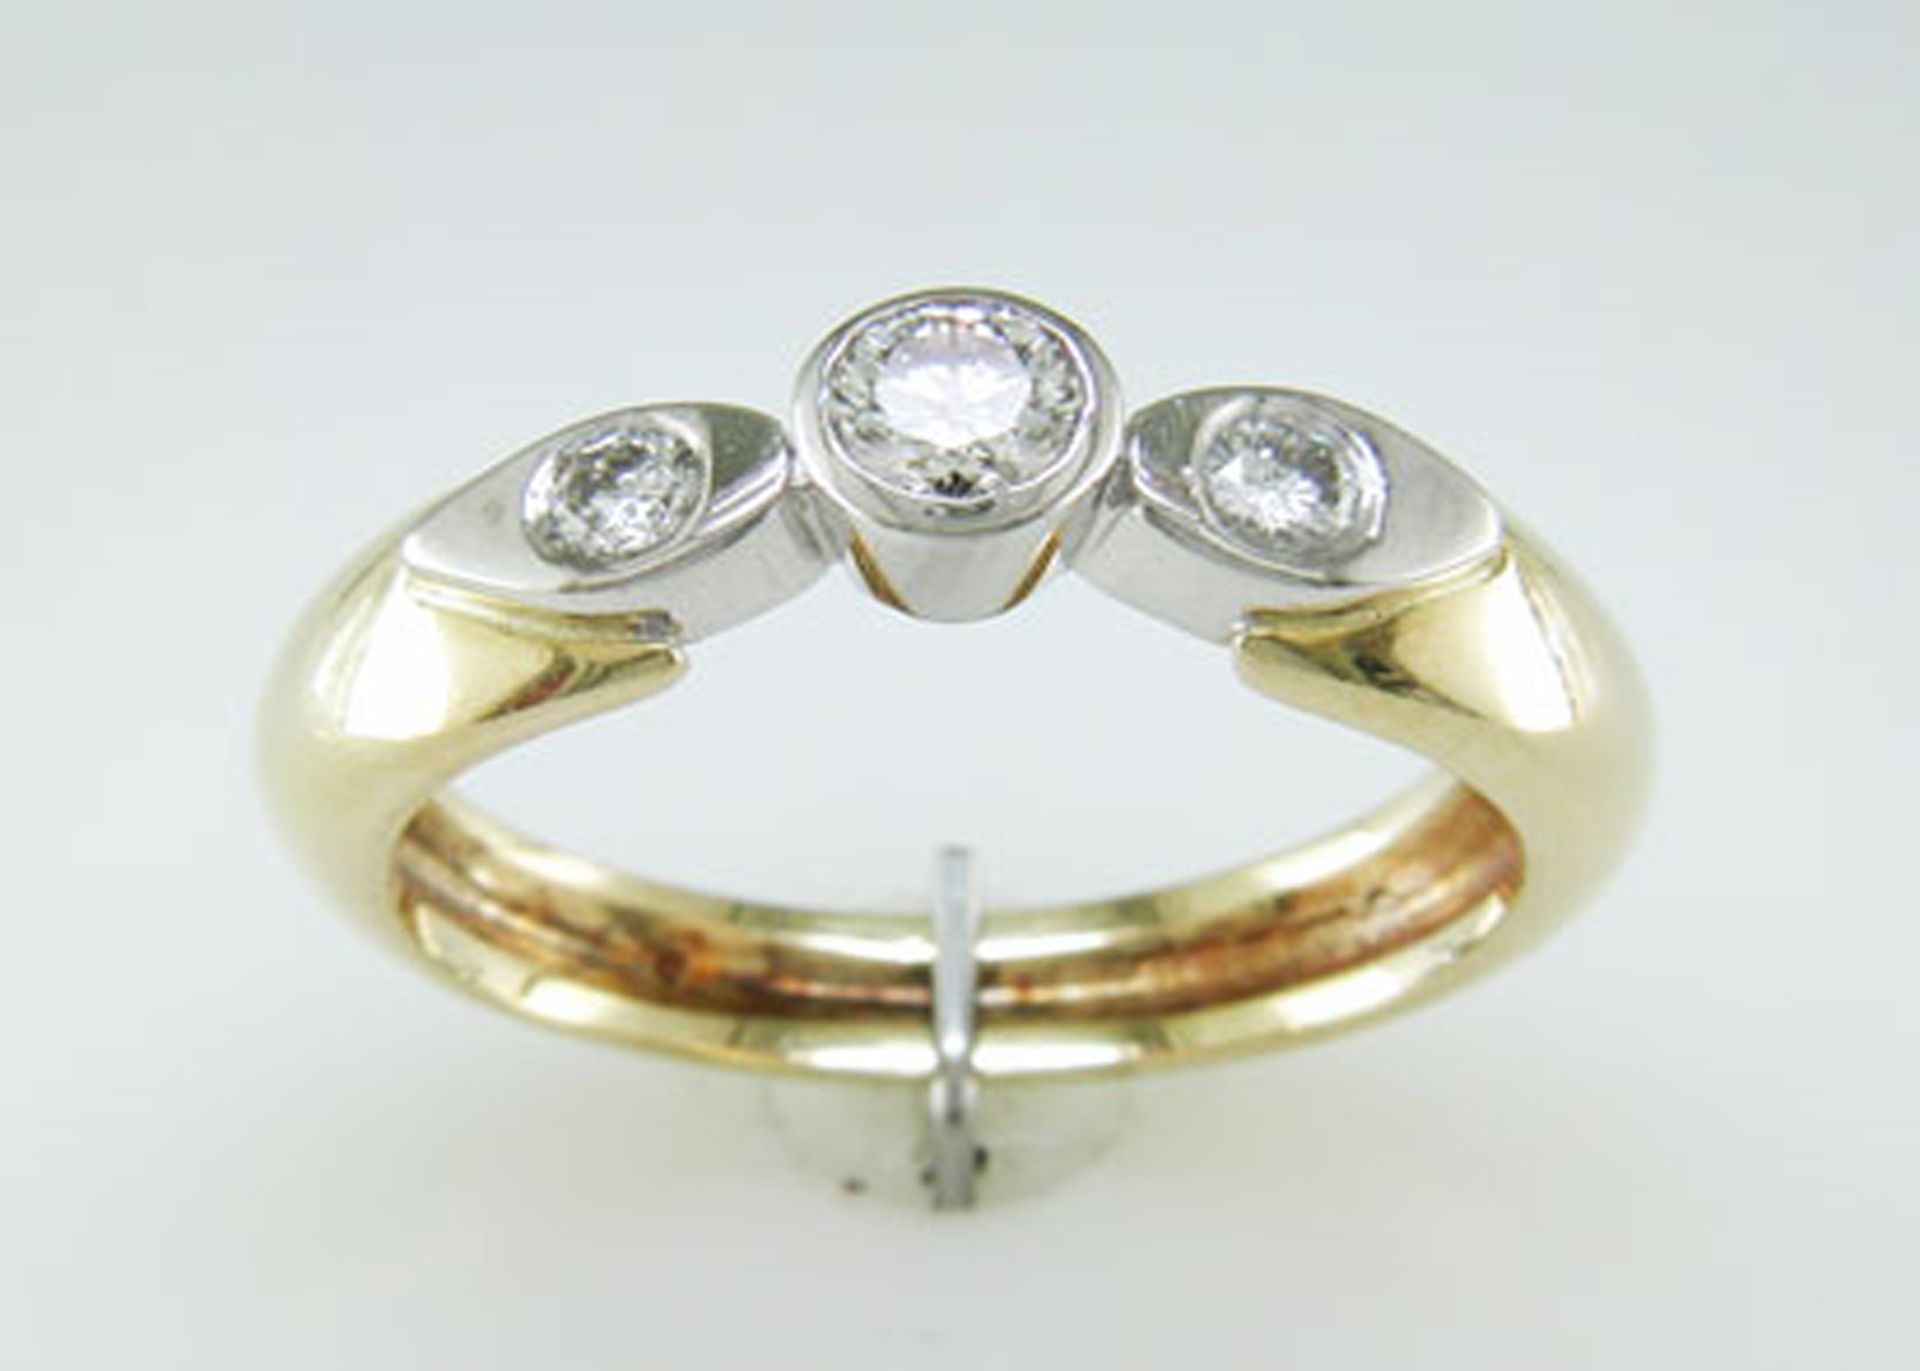 18ct Stone Set Shoulder Diamond Ring 0.41 Carats - Valued By GIE £10,995.00 - A striking rub set - Image 7 of 8